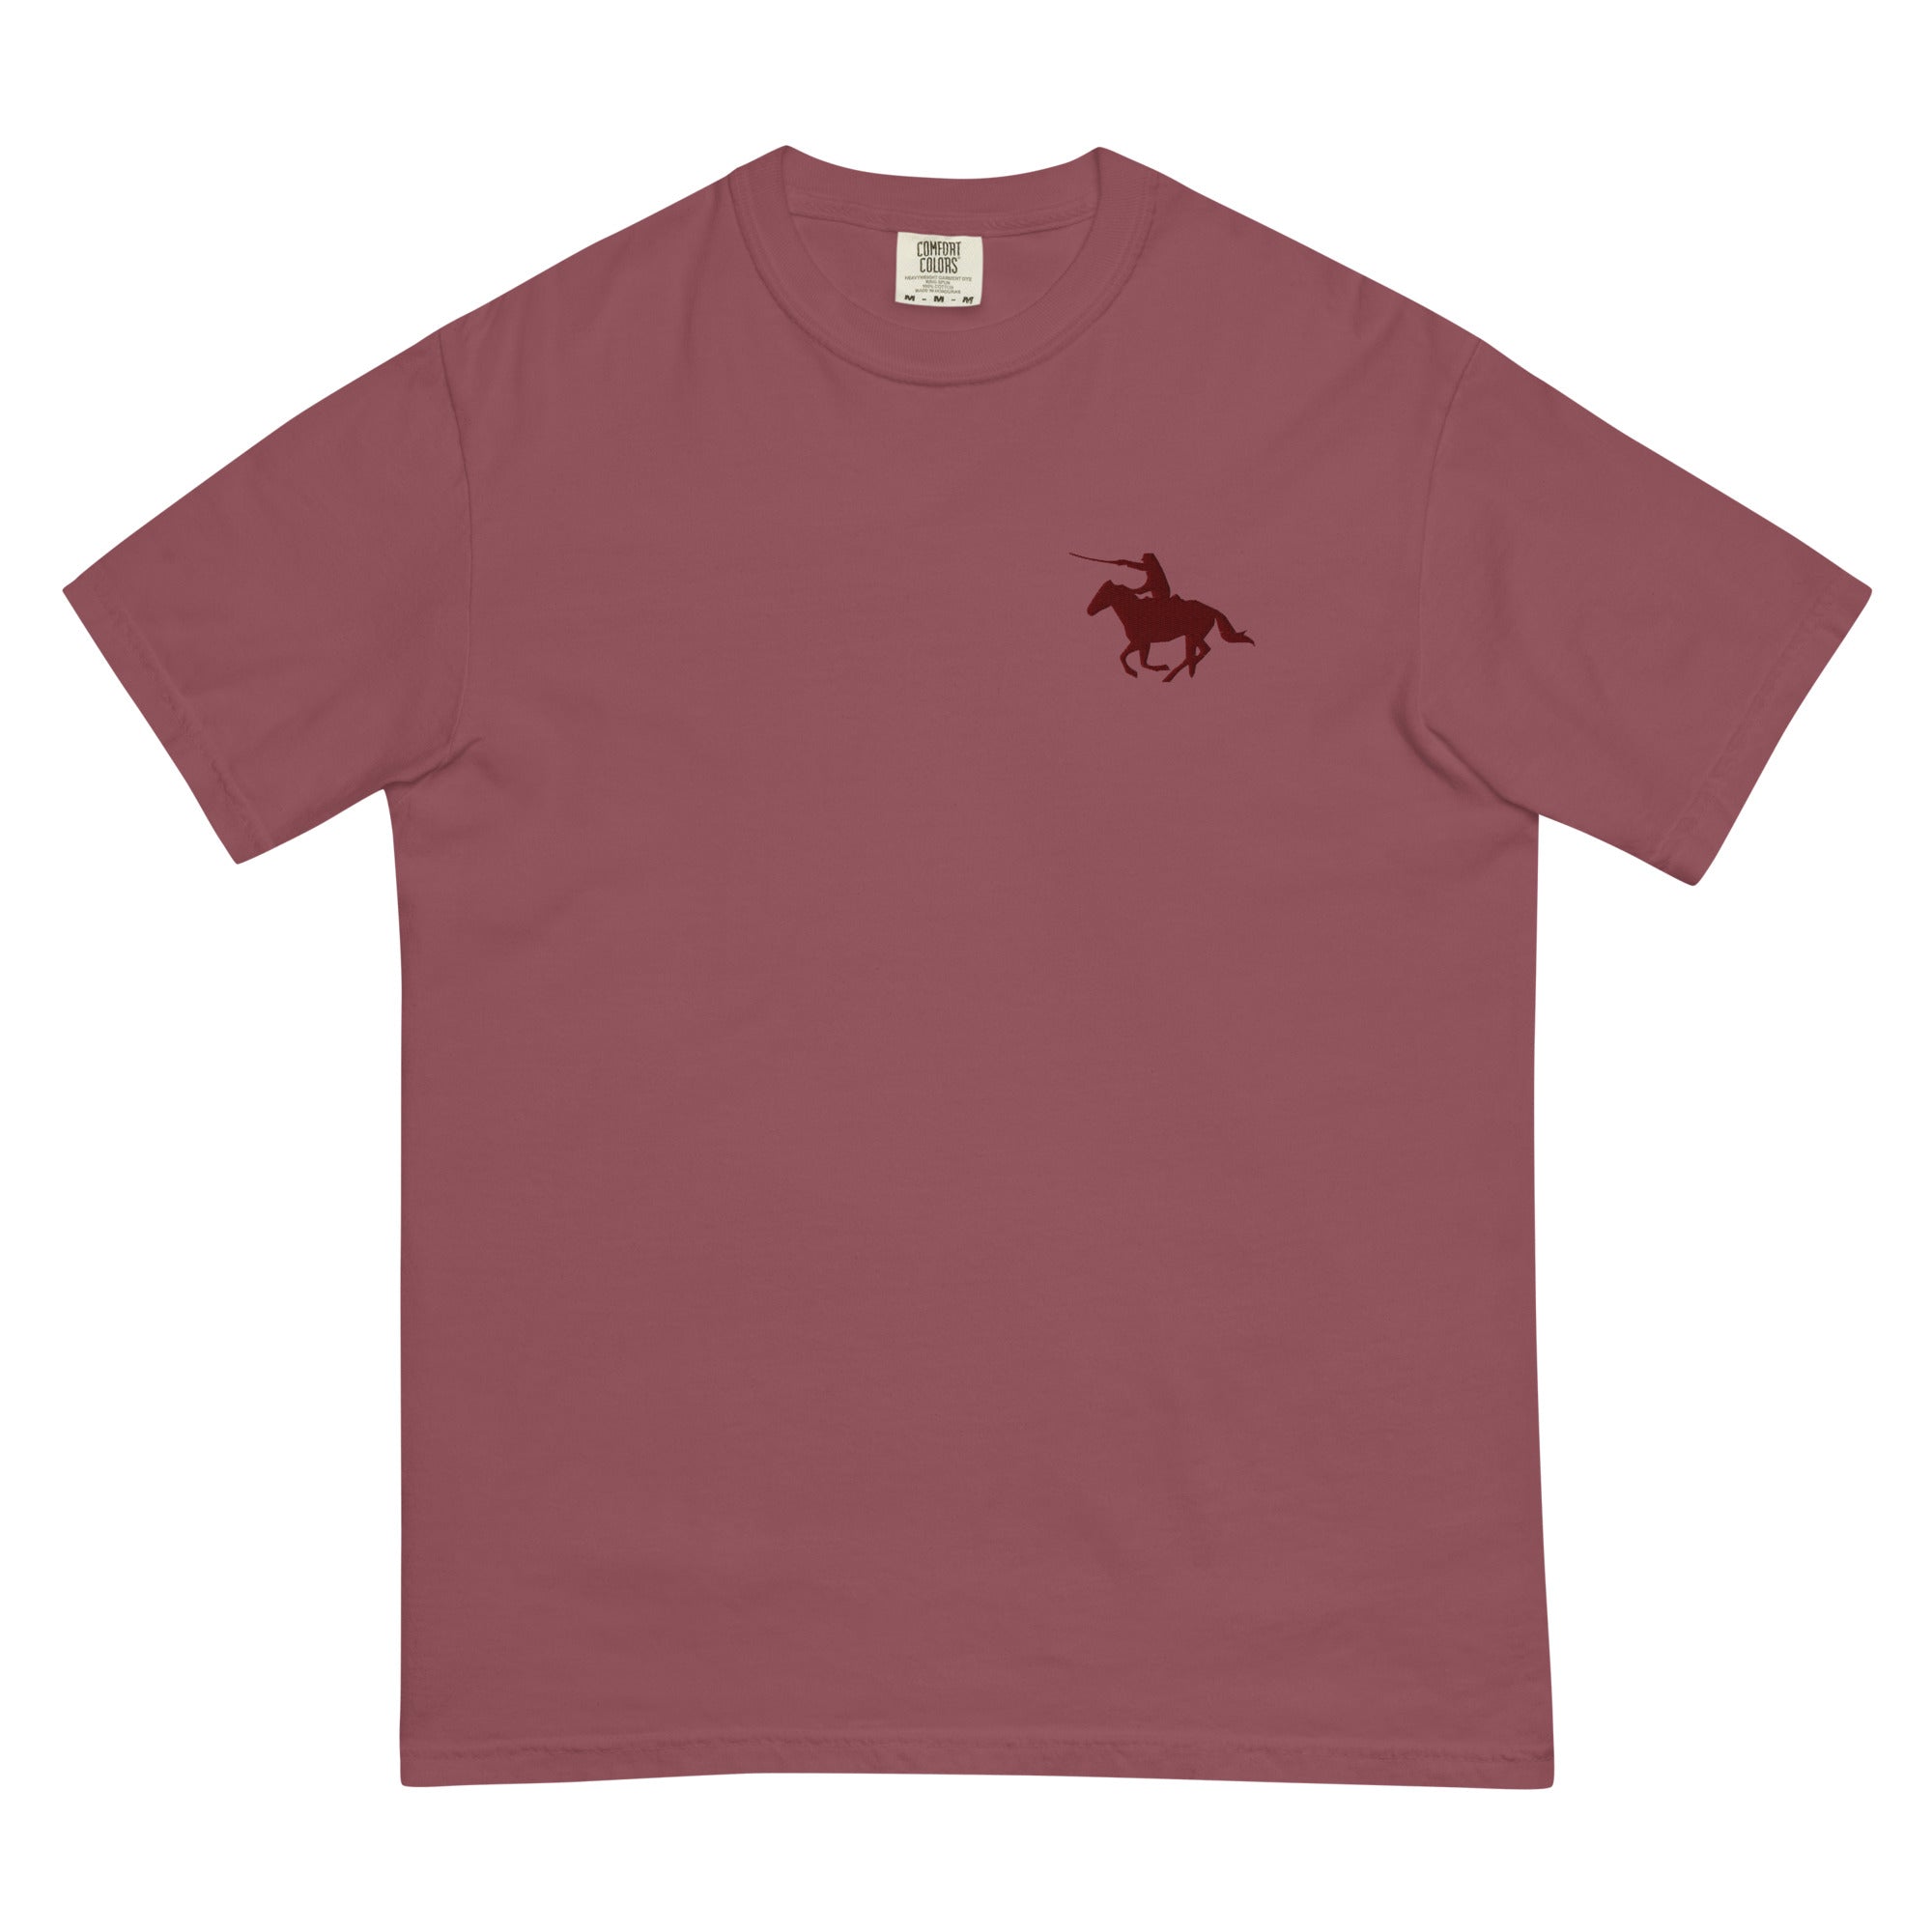 Cavalry Charge Men’s garment-dyed heavyweight t-shirt